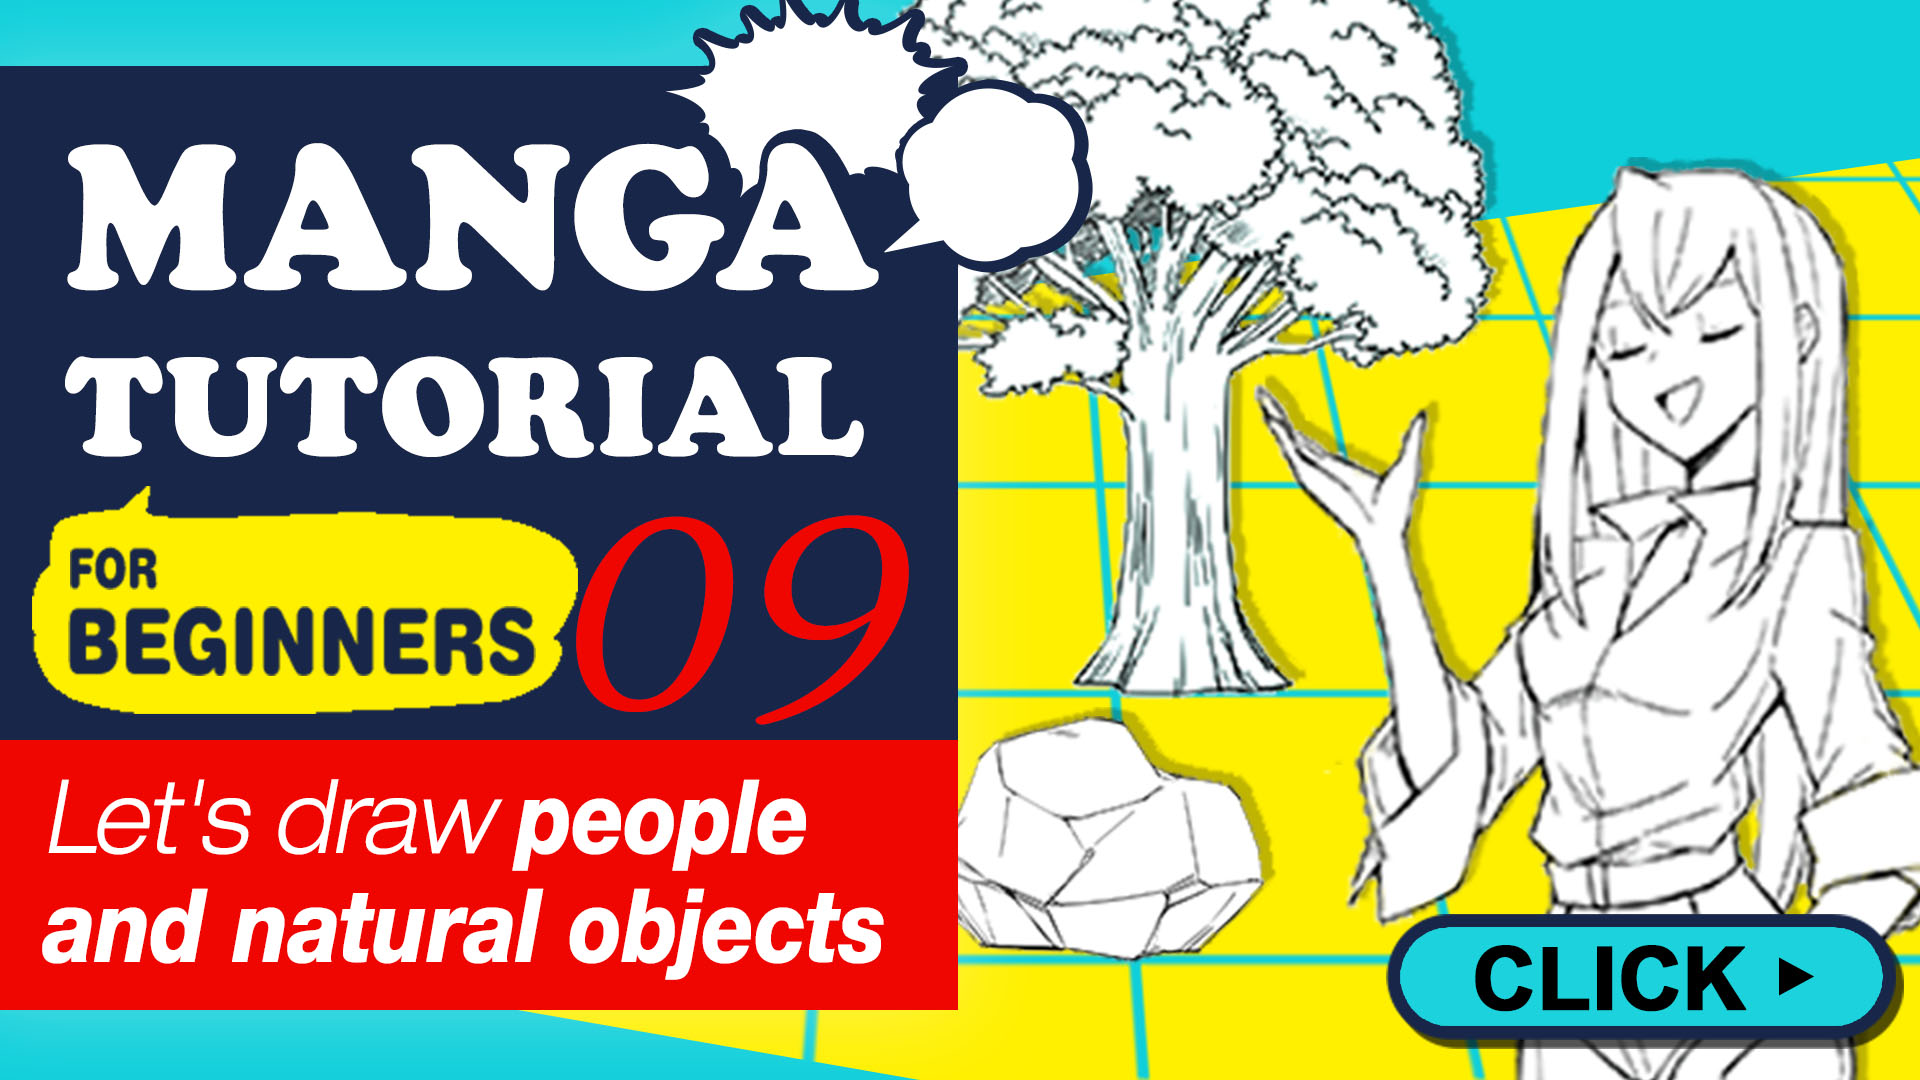 Manga Tutorial for Beginners 09 Let's draw people and natural objects |  MediBang Paint - the free digital painting and manga creation software